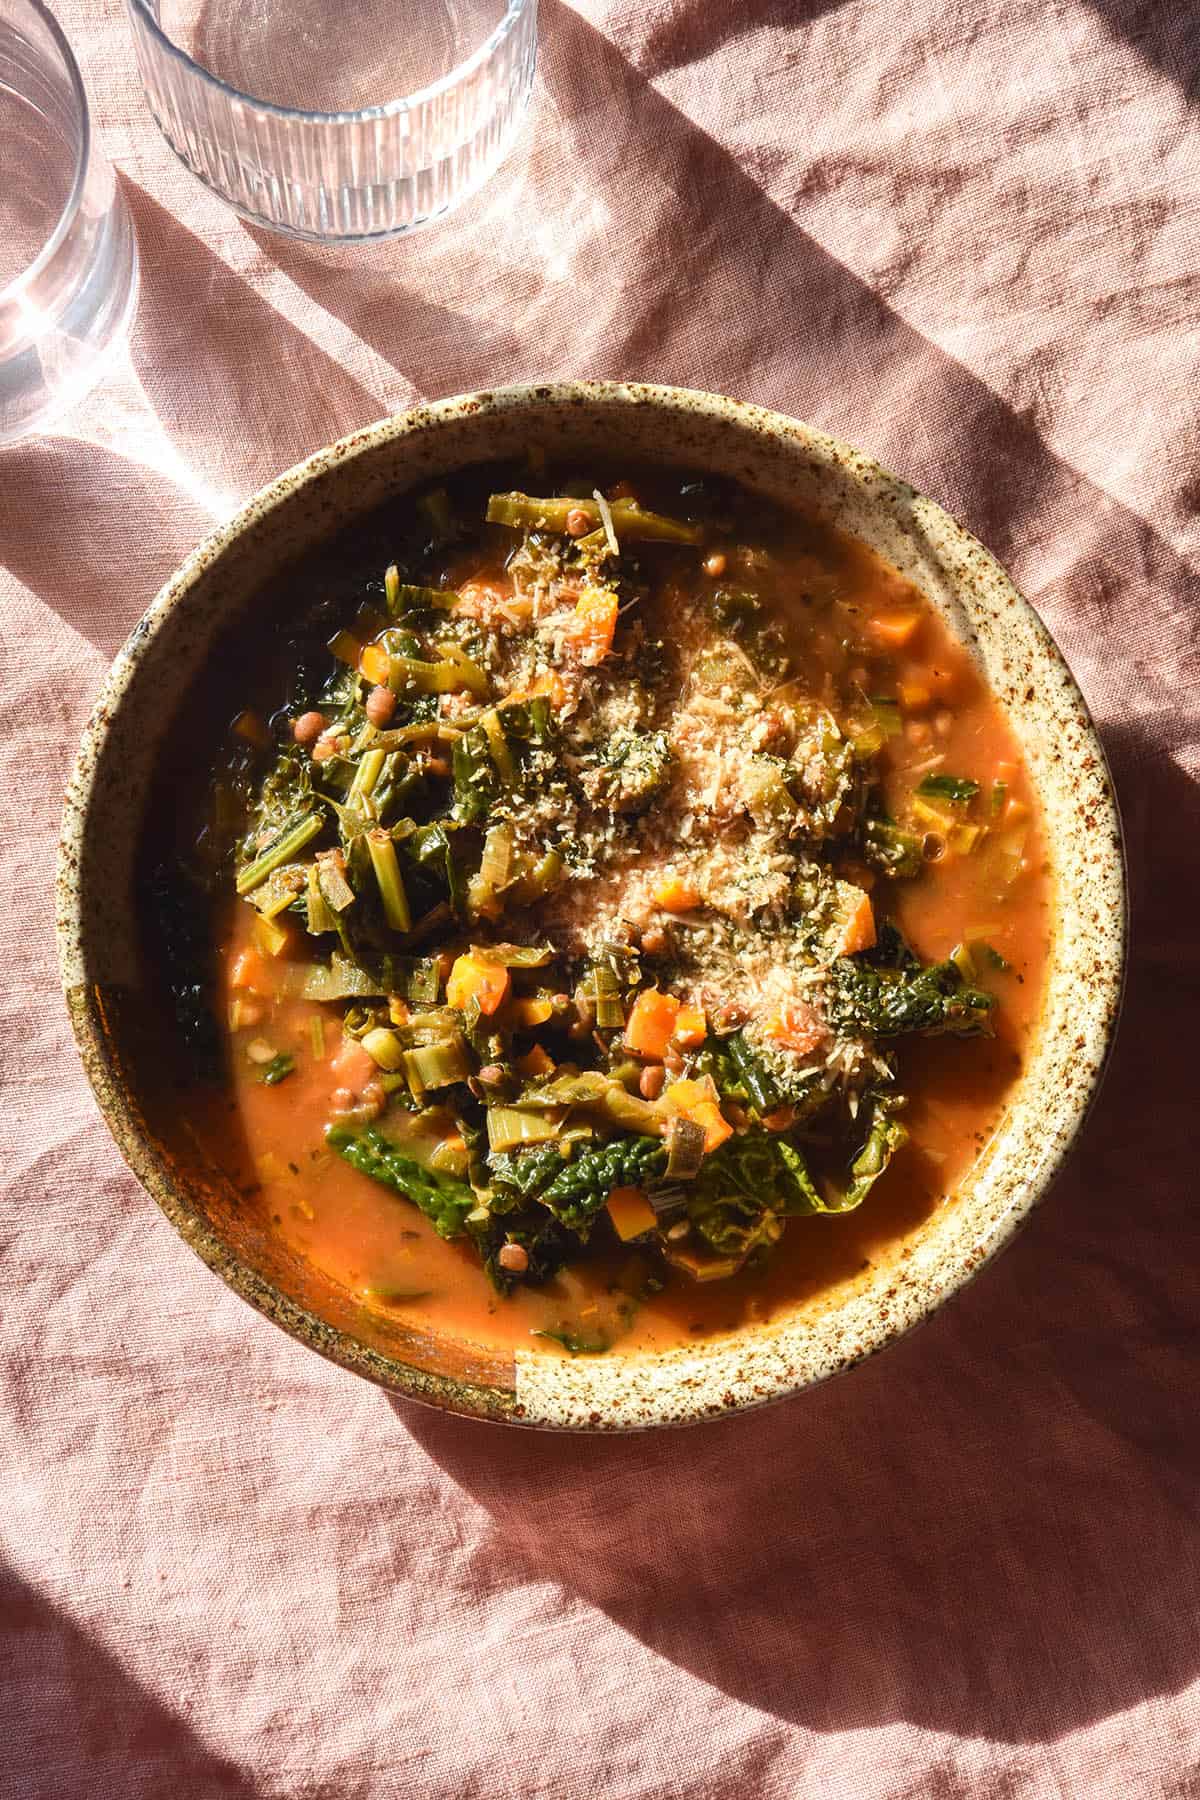 A sunlit aerial image of a bowl of low FODMAP lentil soup in a speckled beige bowl atop a pale pink linen tablecloth. The soup has a deep red broth and is topped with freshly grated parmesan 